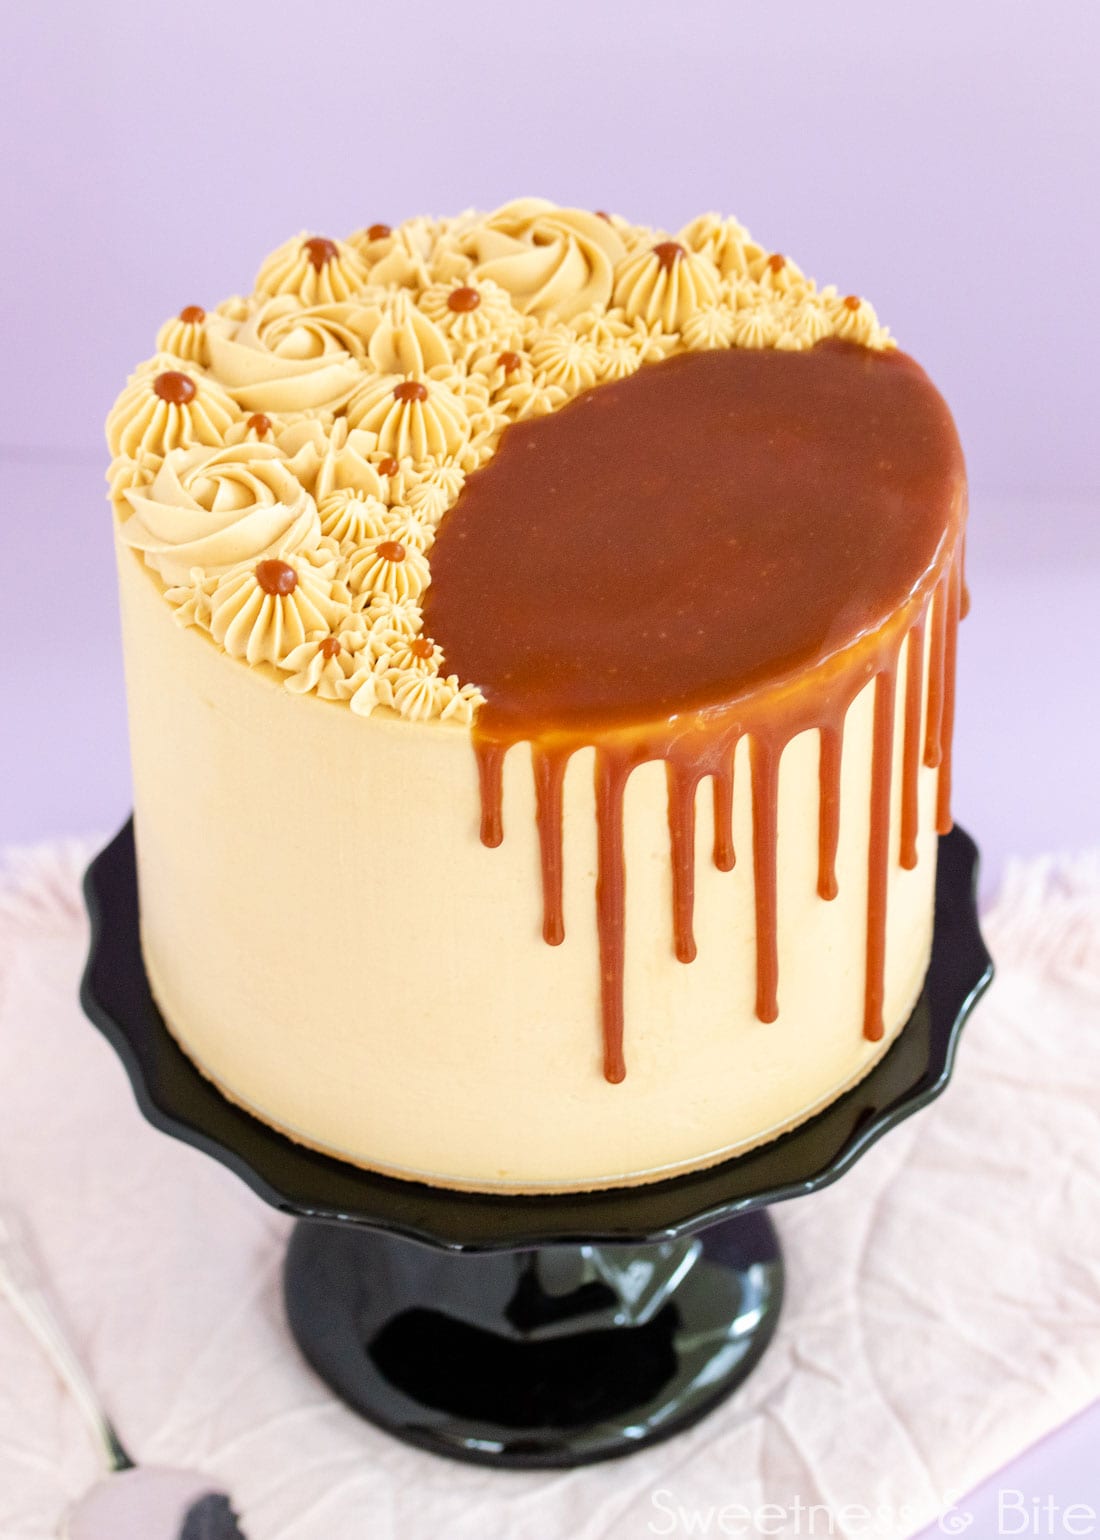 Caramel mud cake on a black cake stand, decorated with swirls of caramel buttercream on top, and a caramel sauce drip. 